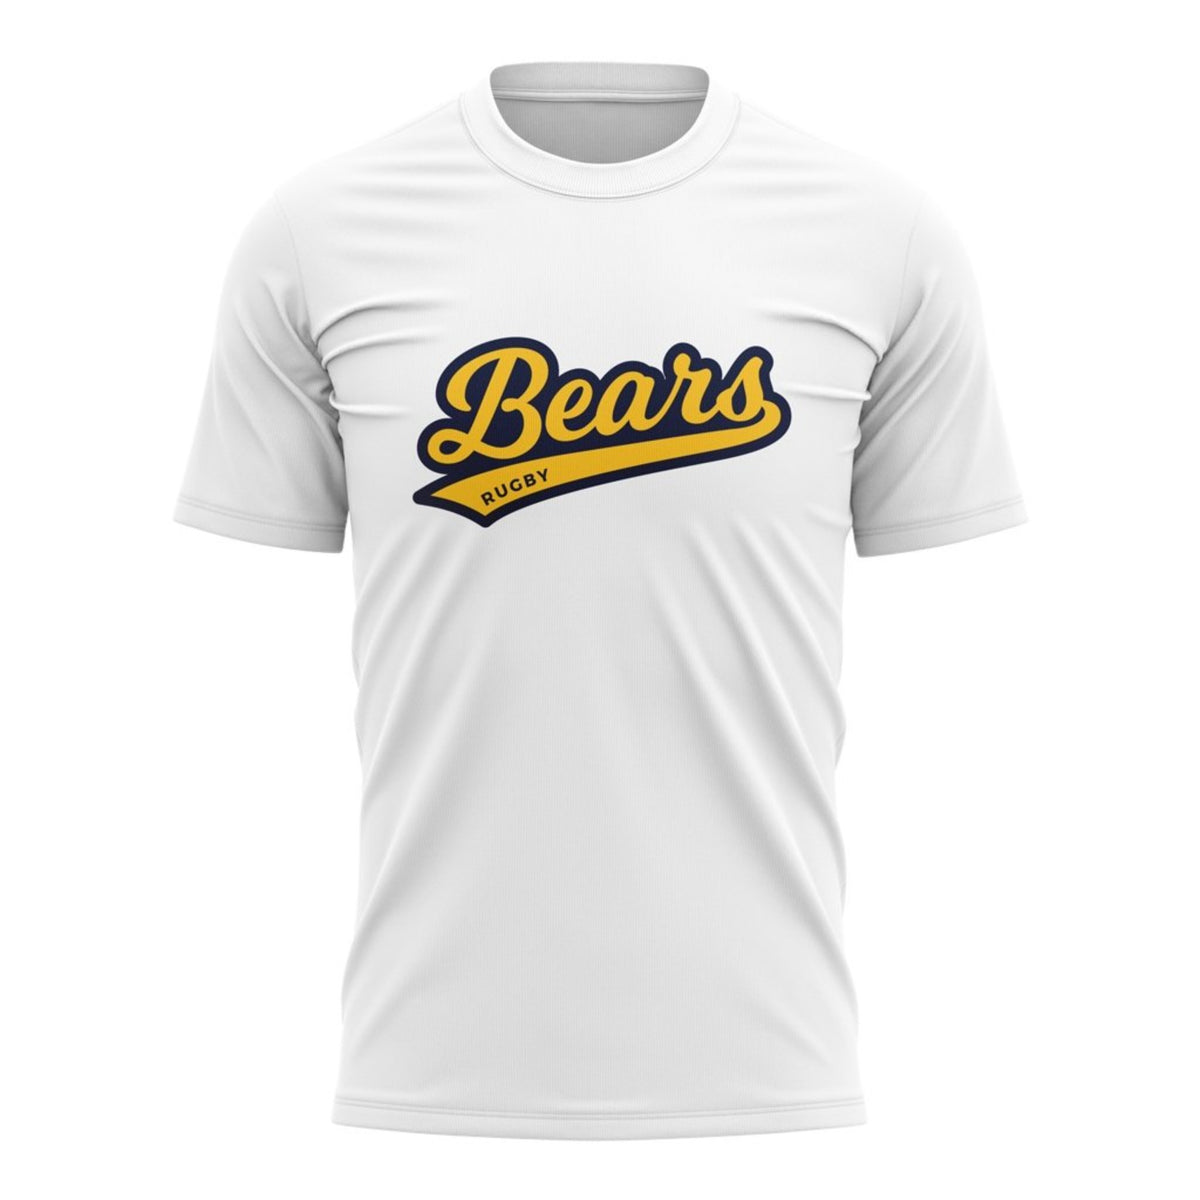 BC Rugby 2021 &quot;Bears&quot; Tee - Youth White/Gold - www.therugbyshop.com www.therugbyshop.com YOUTH / WHITE / XS XIX Brands TEES BC Rugby 2021 &quot;Bears&quot; Tee - Youth White/Gold